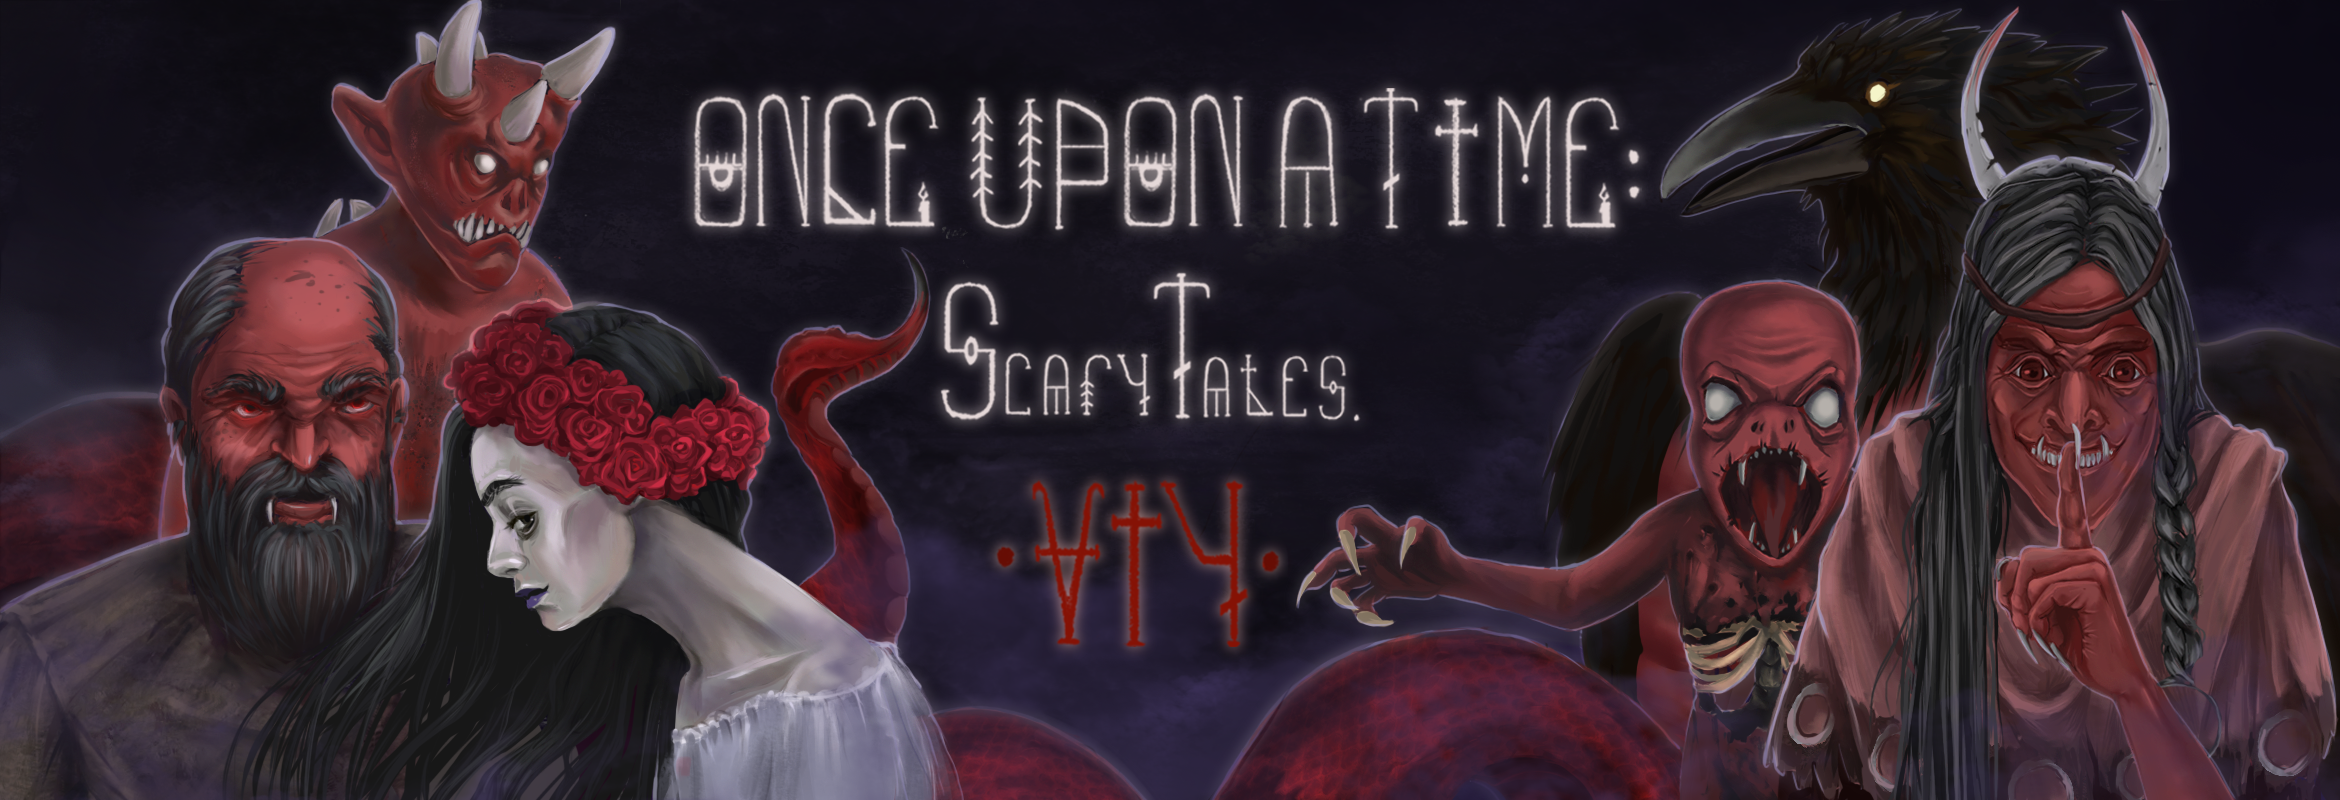 Once upon a time: Scary Tales